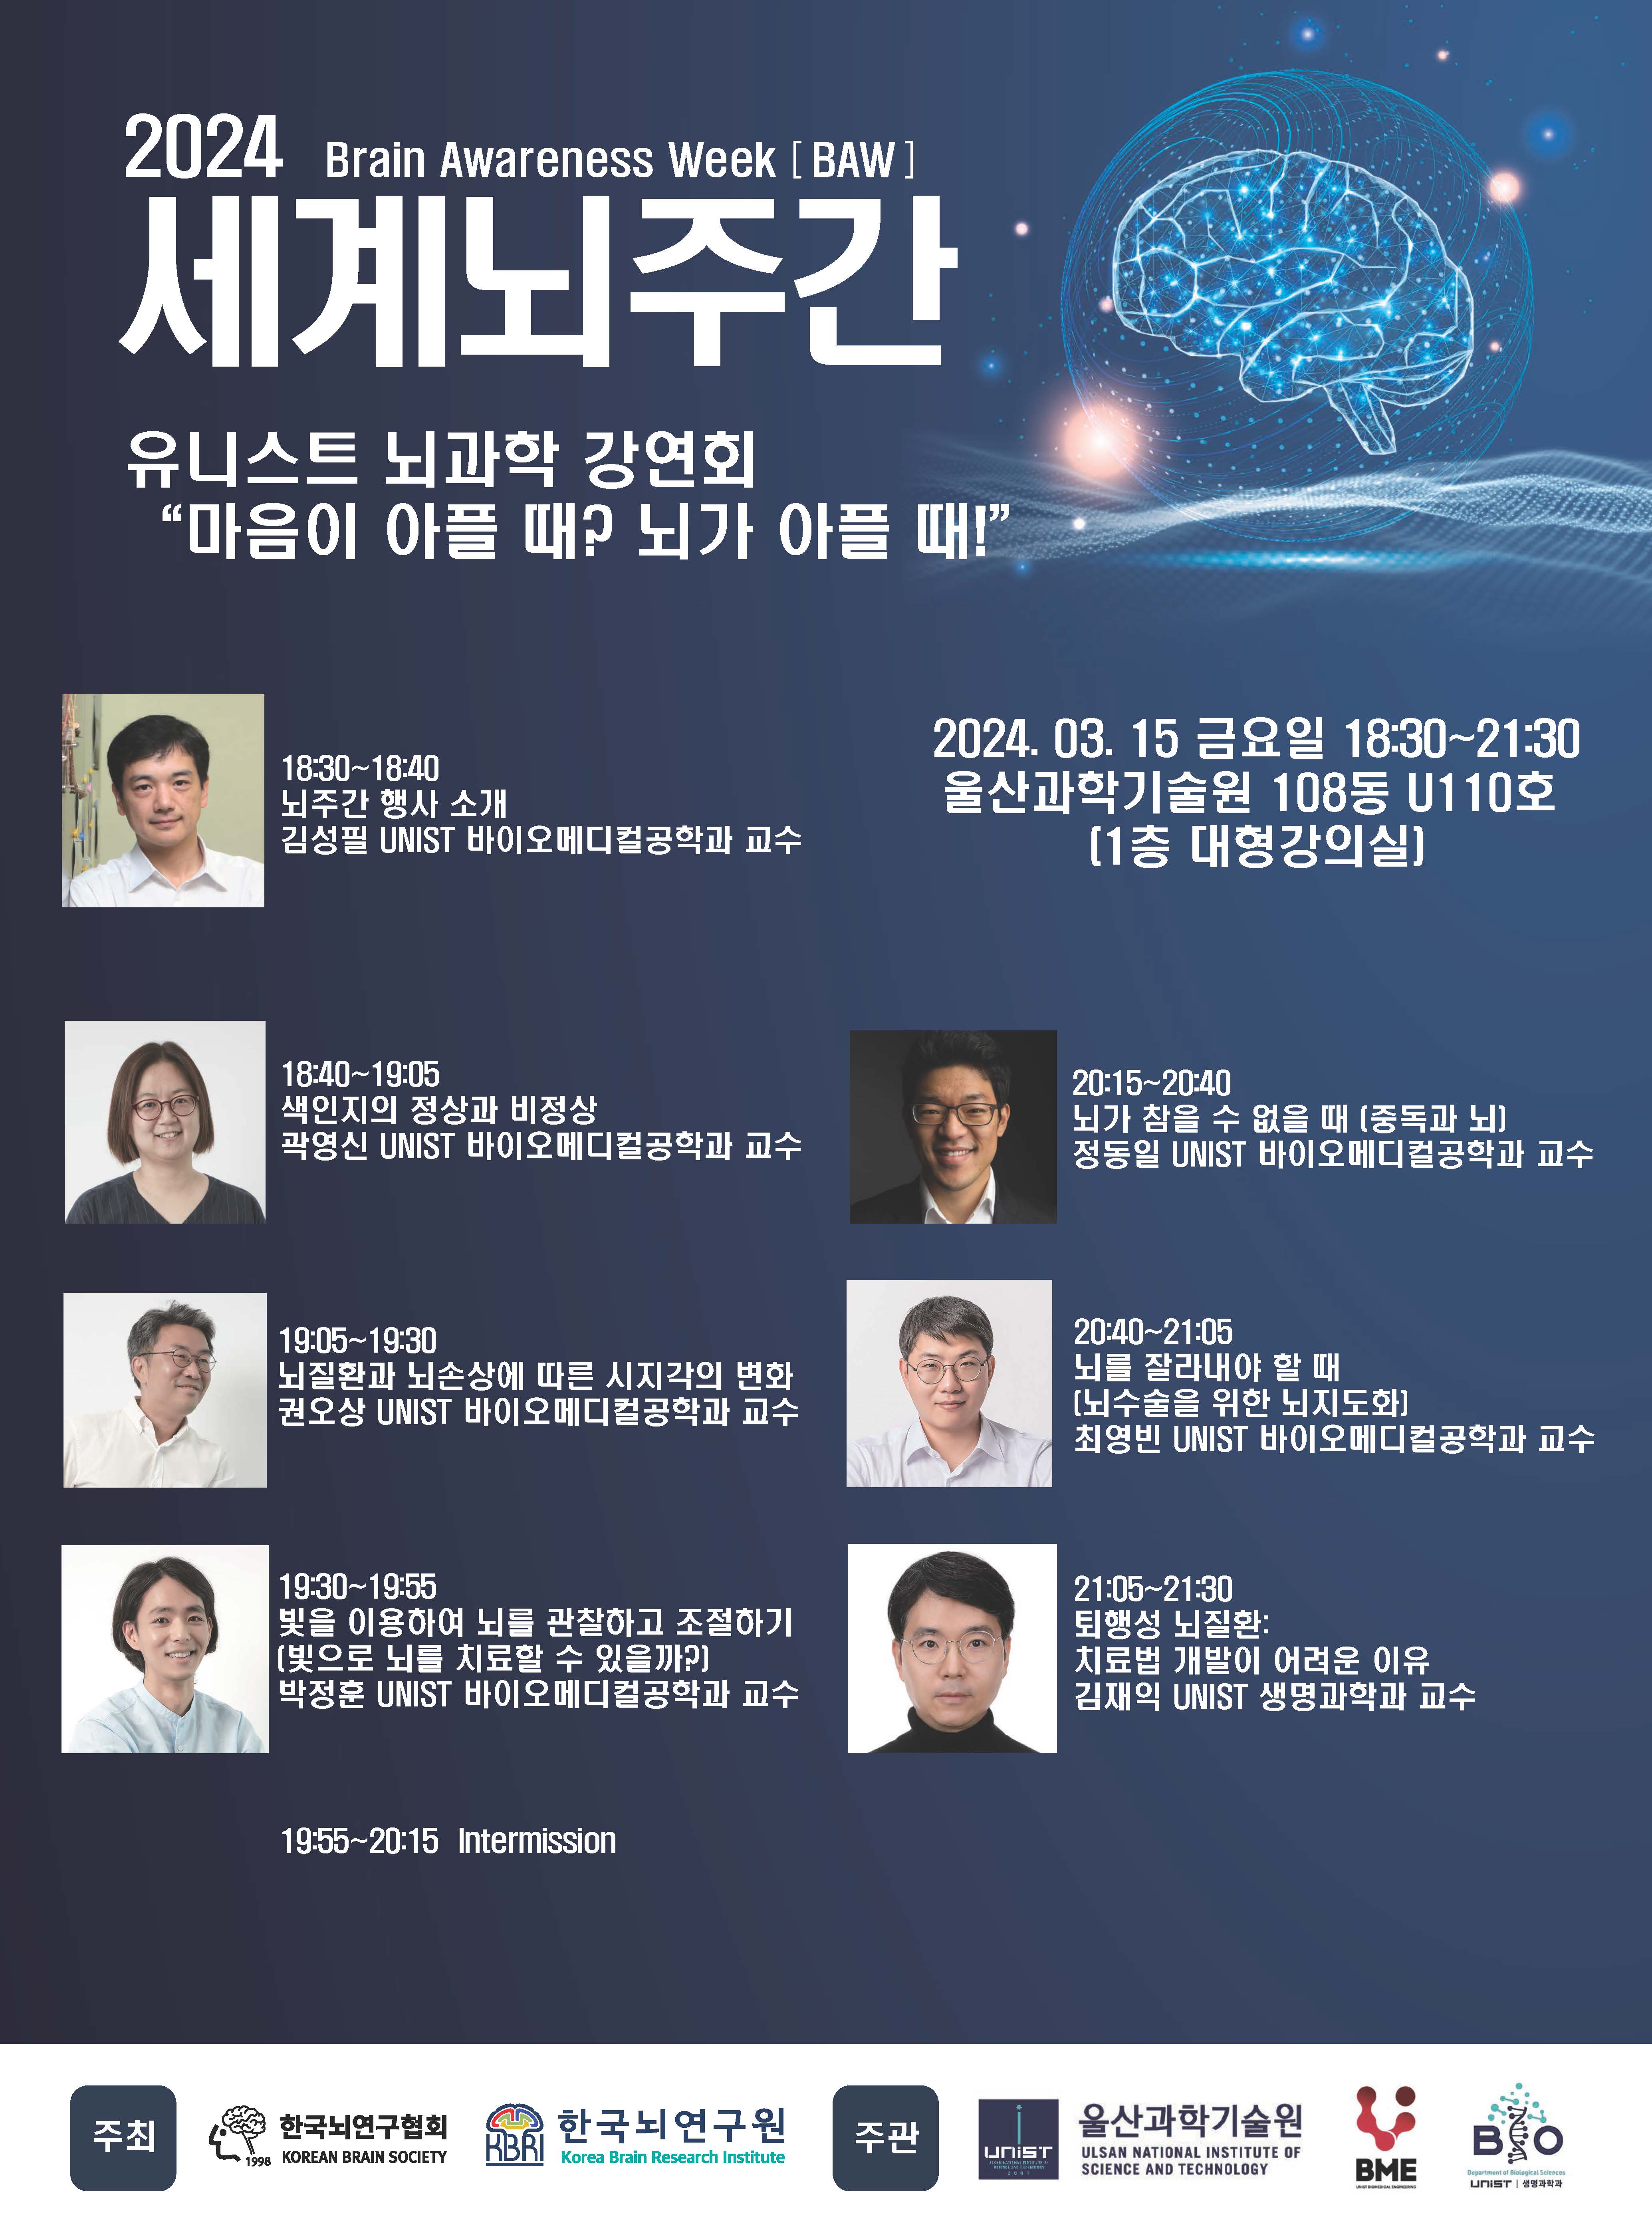 The 'Brain Awareness Week 2024' Public Lecture Series will be held at UNIST on March 15, 2024.